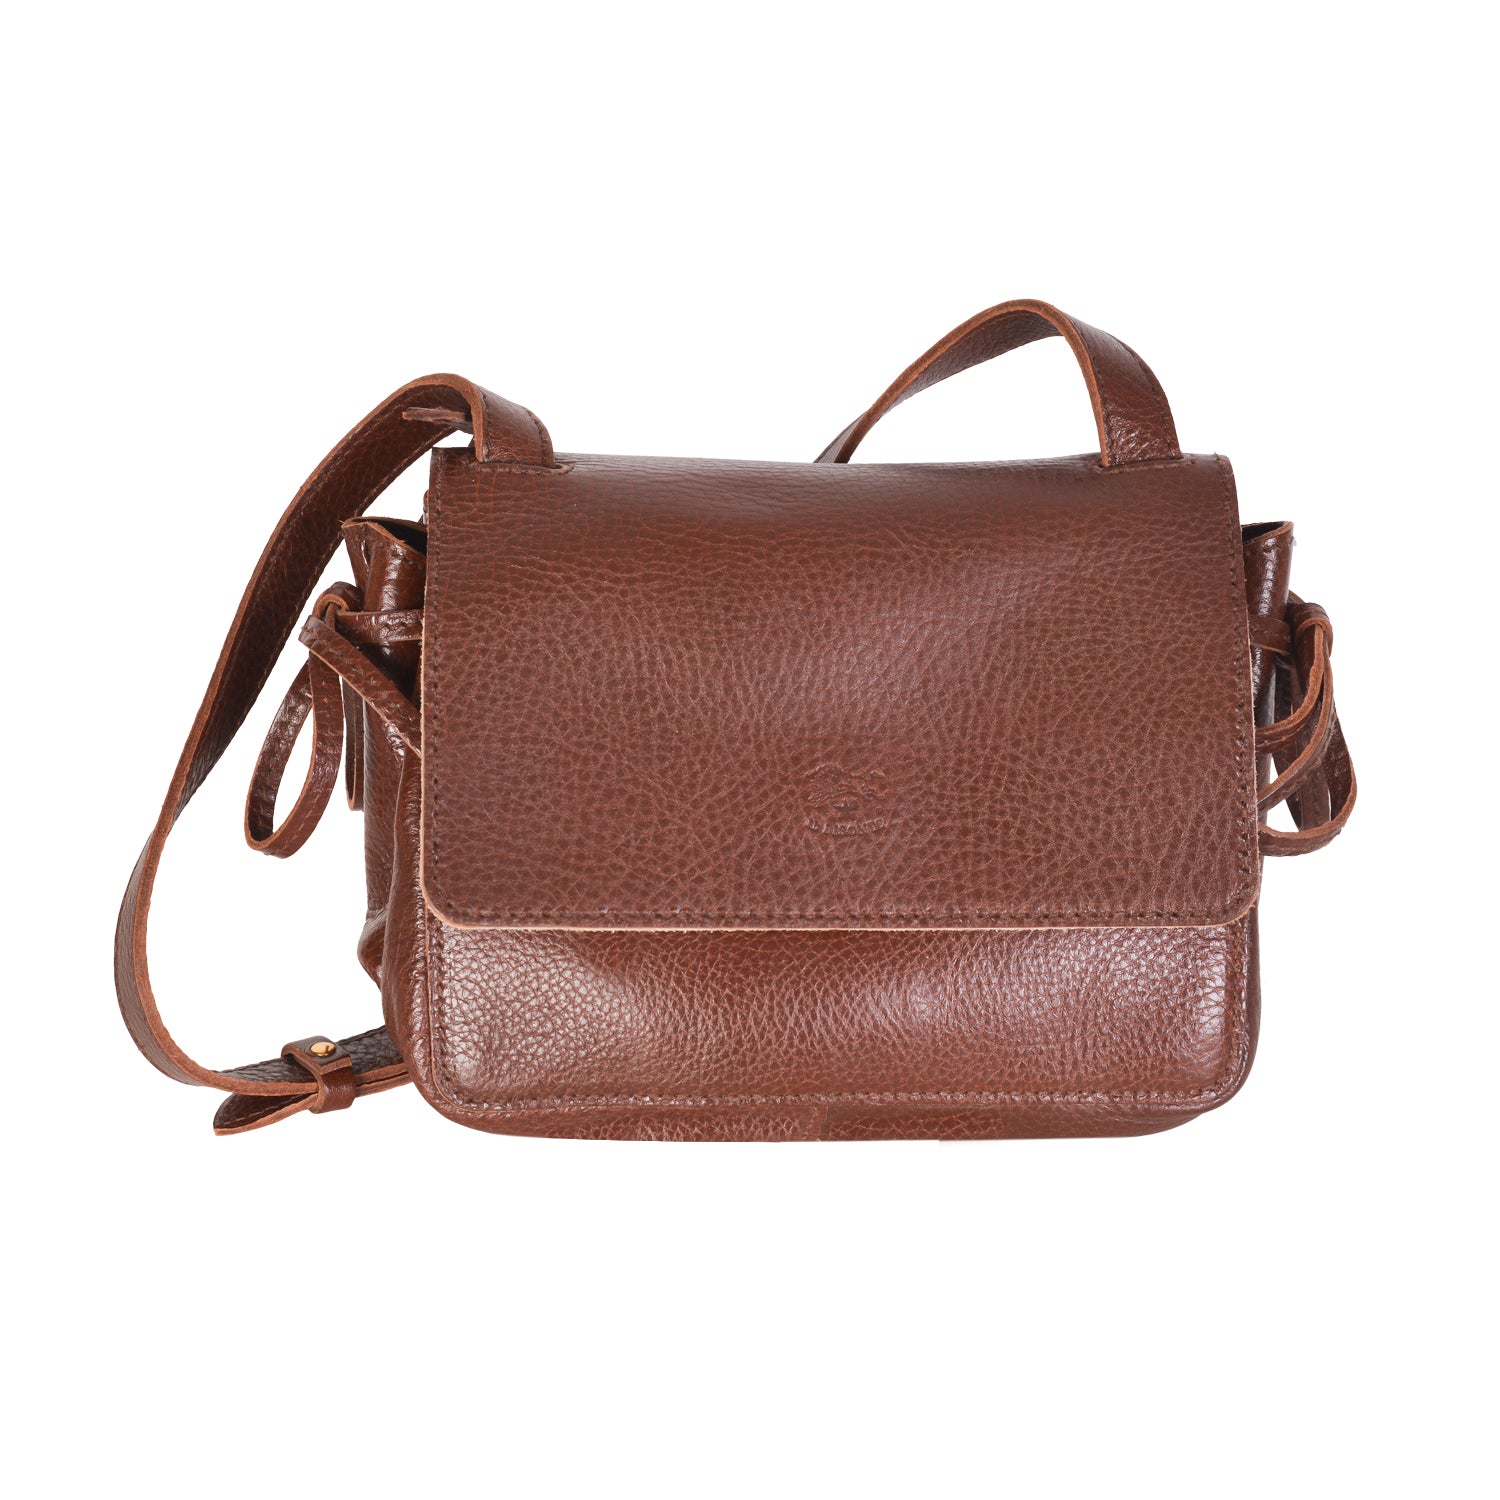 NEW IL BISONTE WOMEN'S SOFFIETTO COLLECTION CROSSBODY BAG IN BROWN LEATHER